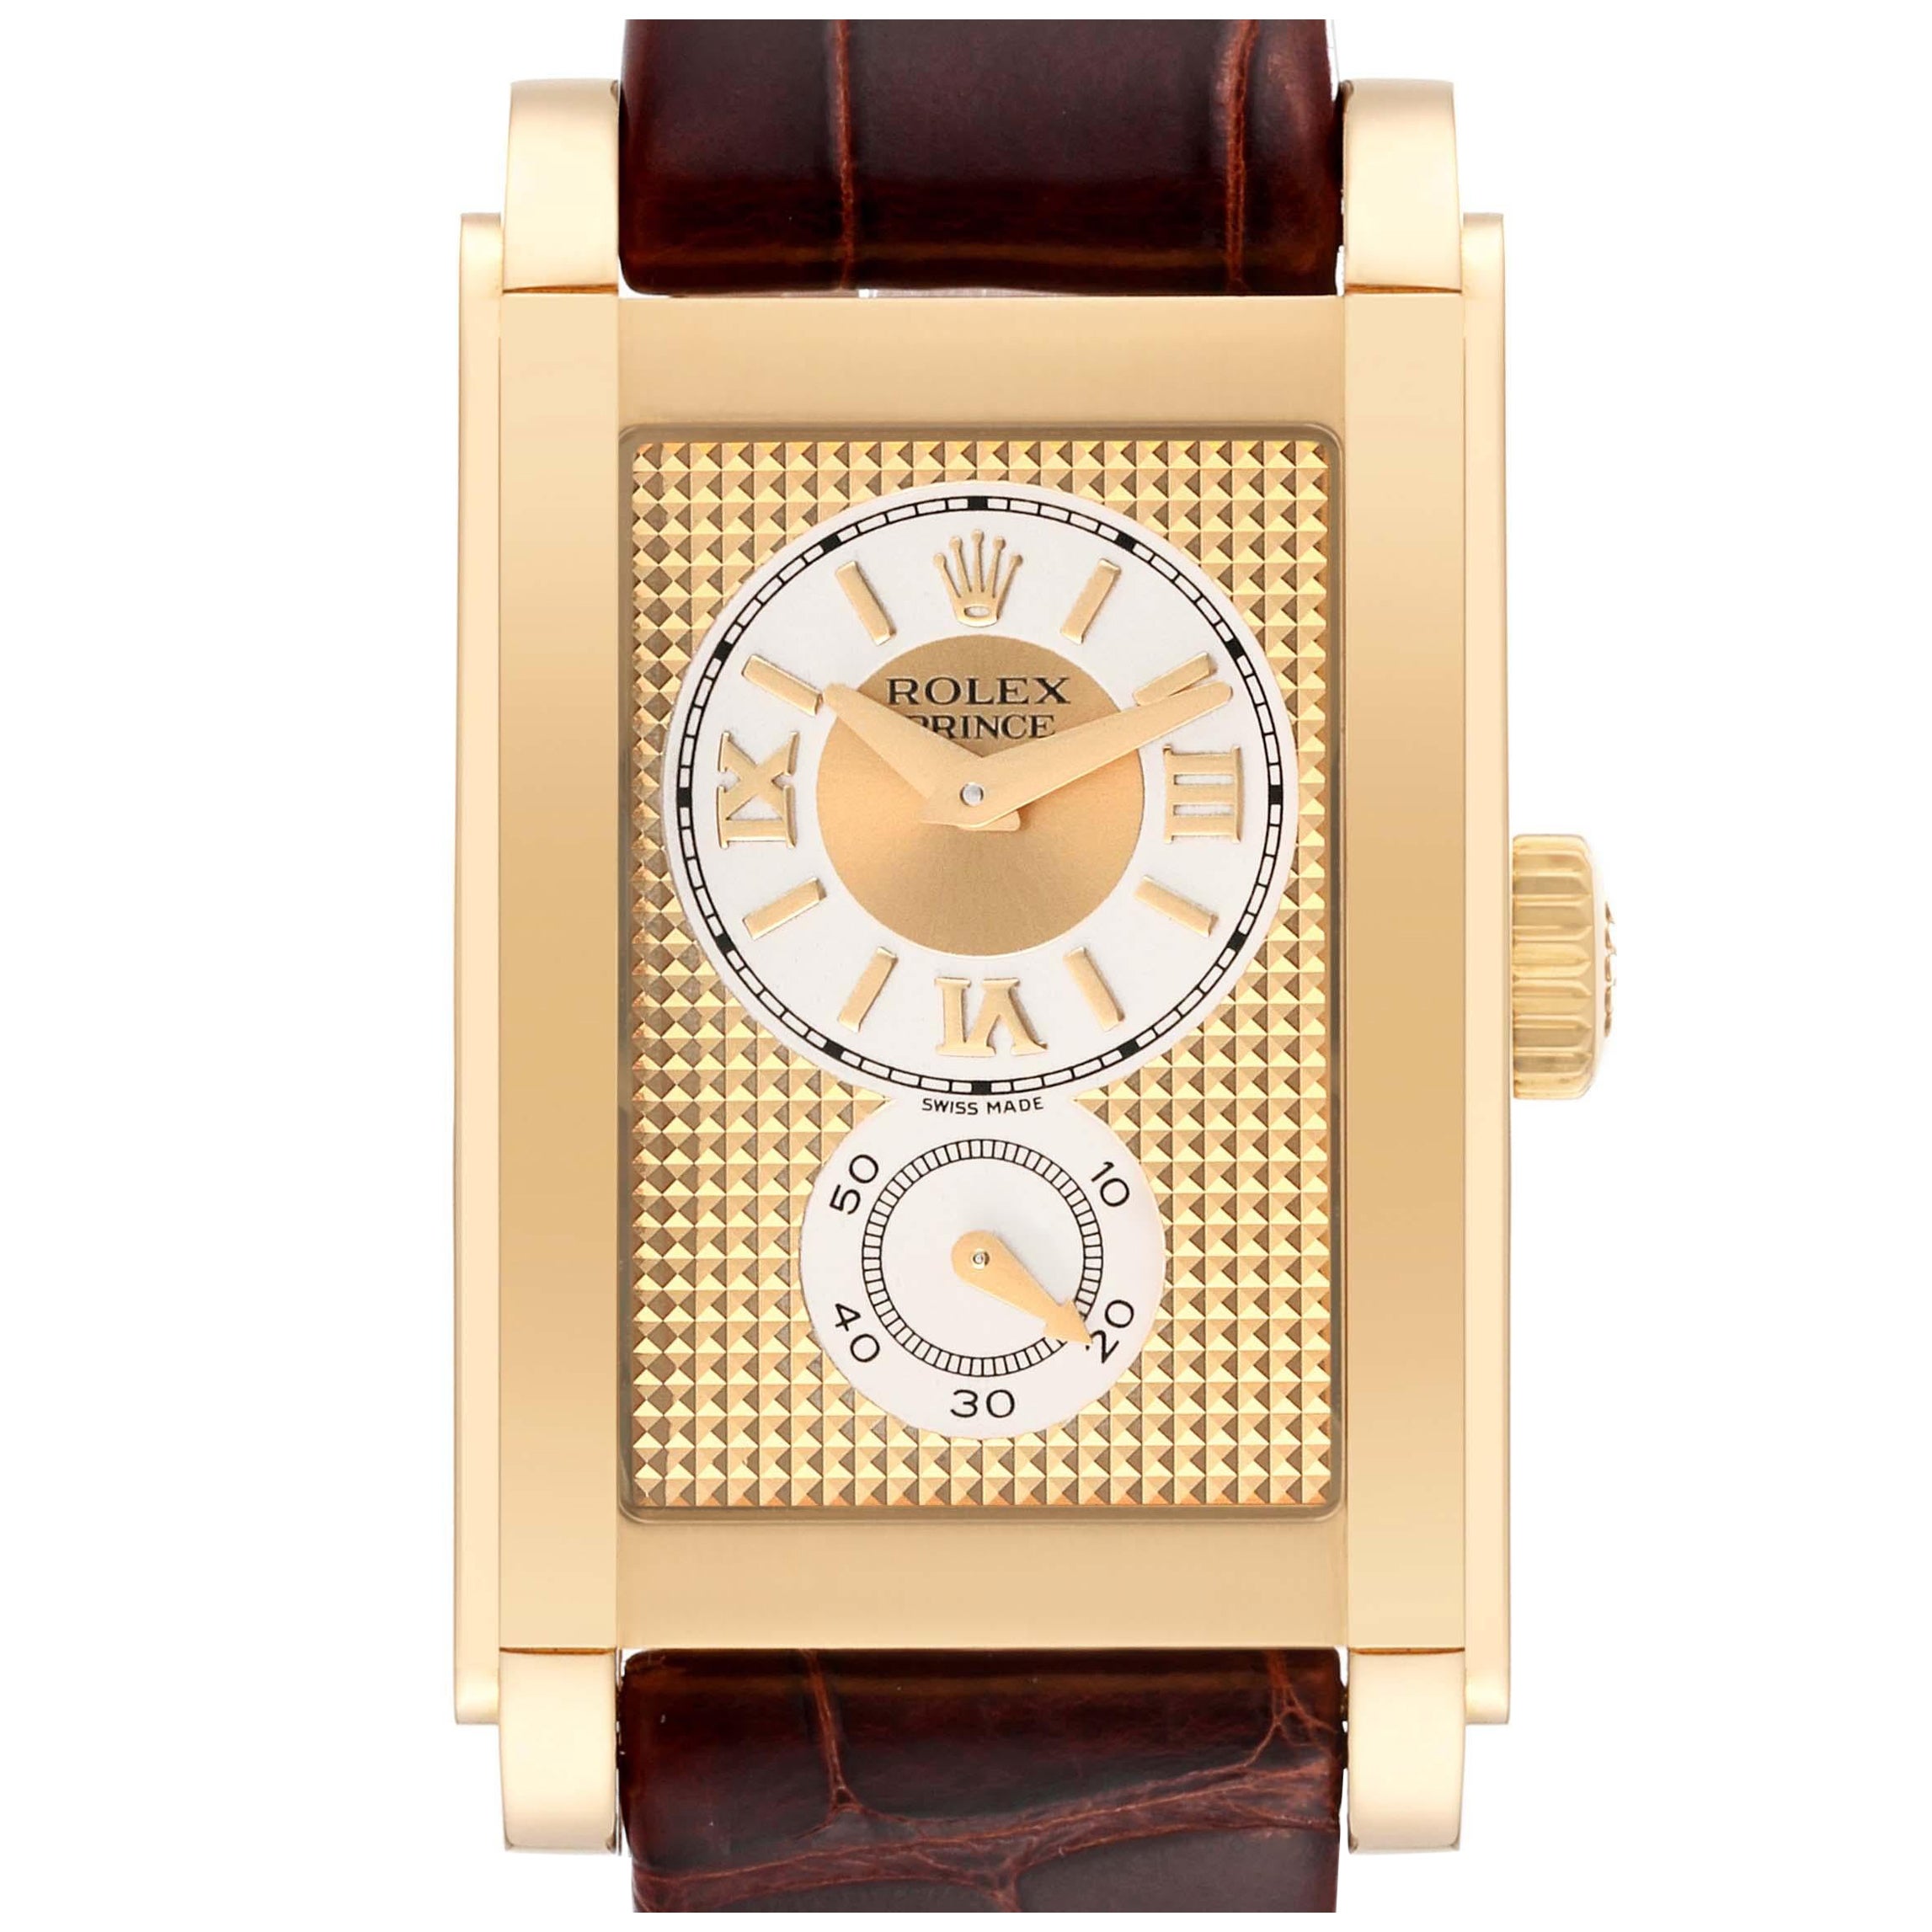 Rolex Cellini Prince Yellow Gold Champagne Roman Dial Mens Watch 5440 Box Card